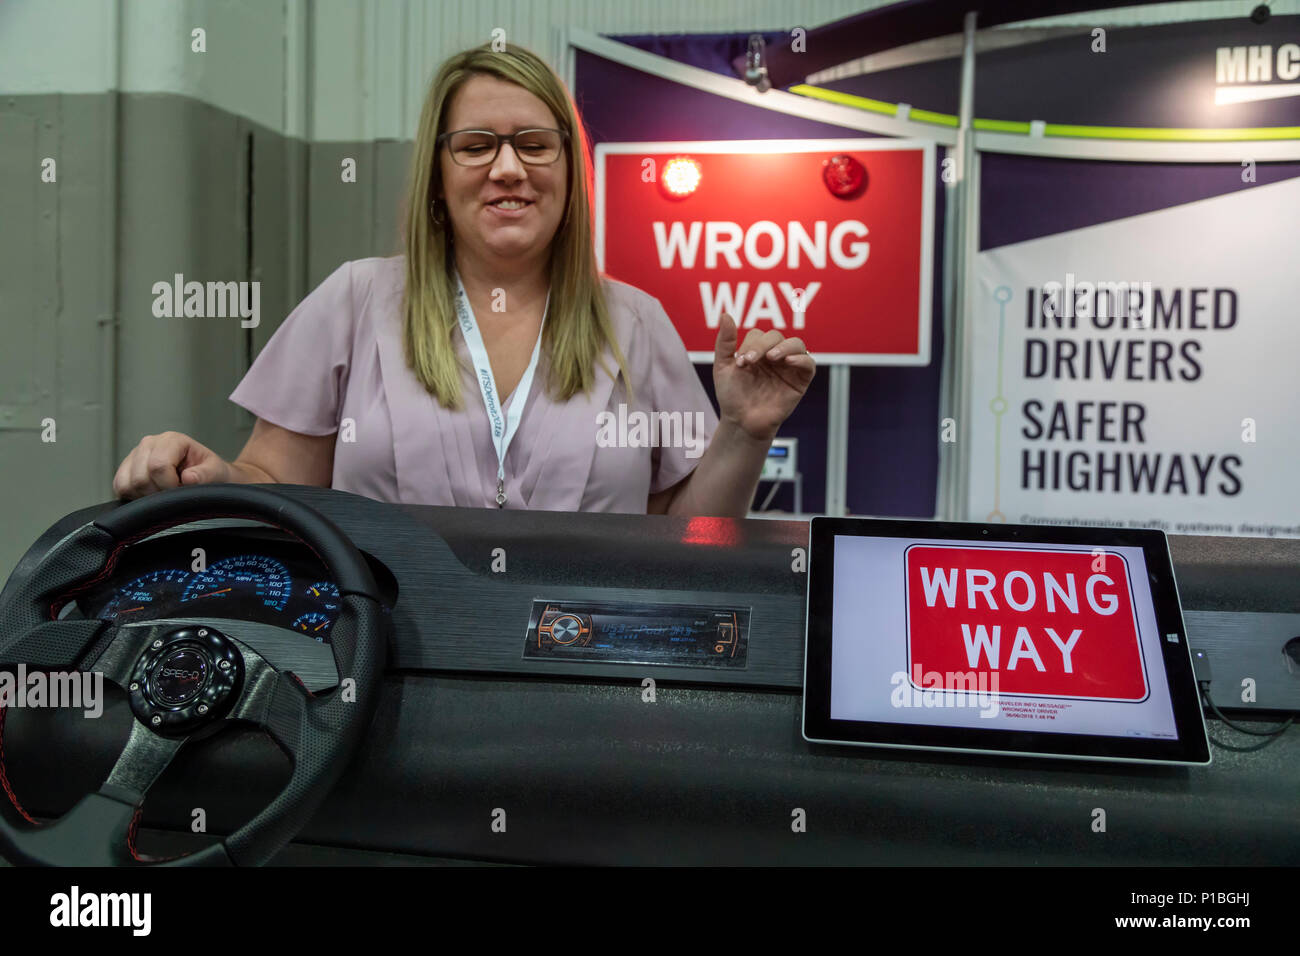 Detroit, Michigan - A demonstration of connected vehicle technology at the Intelligent Transportation Society of America annual meeting. Sensors on th Stock Photo